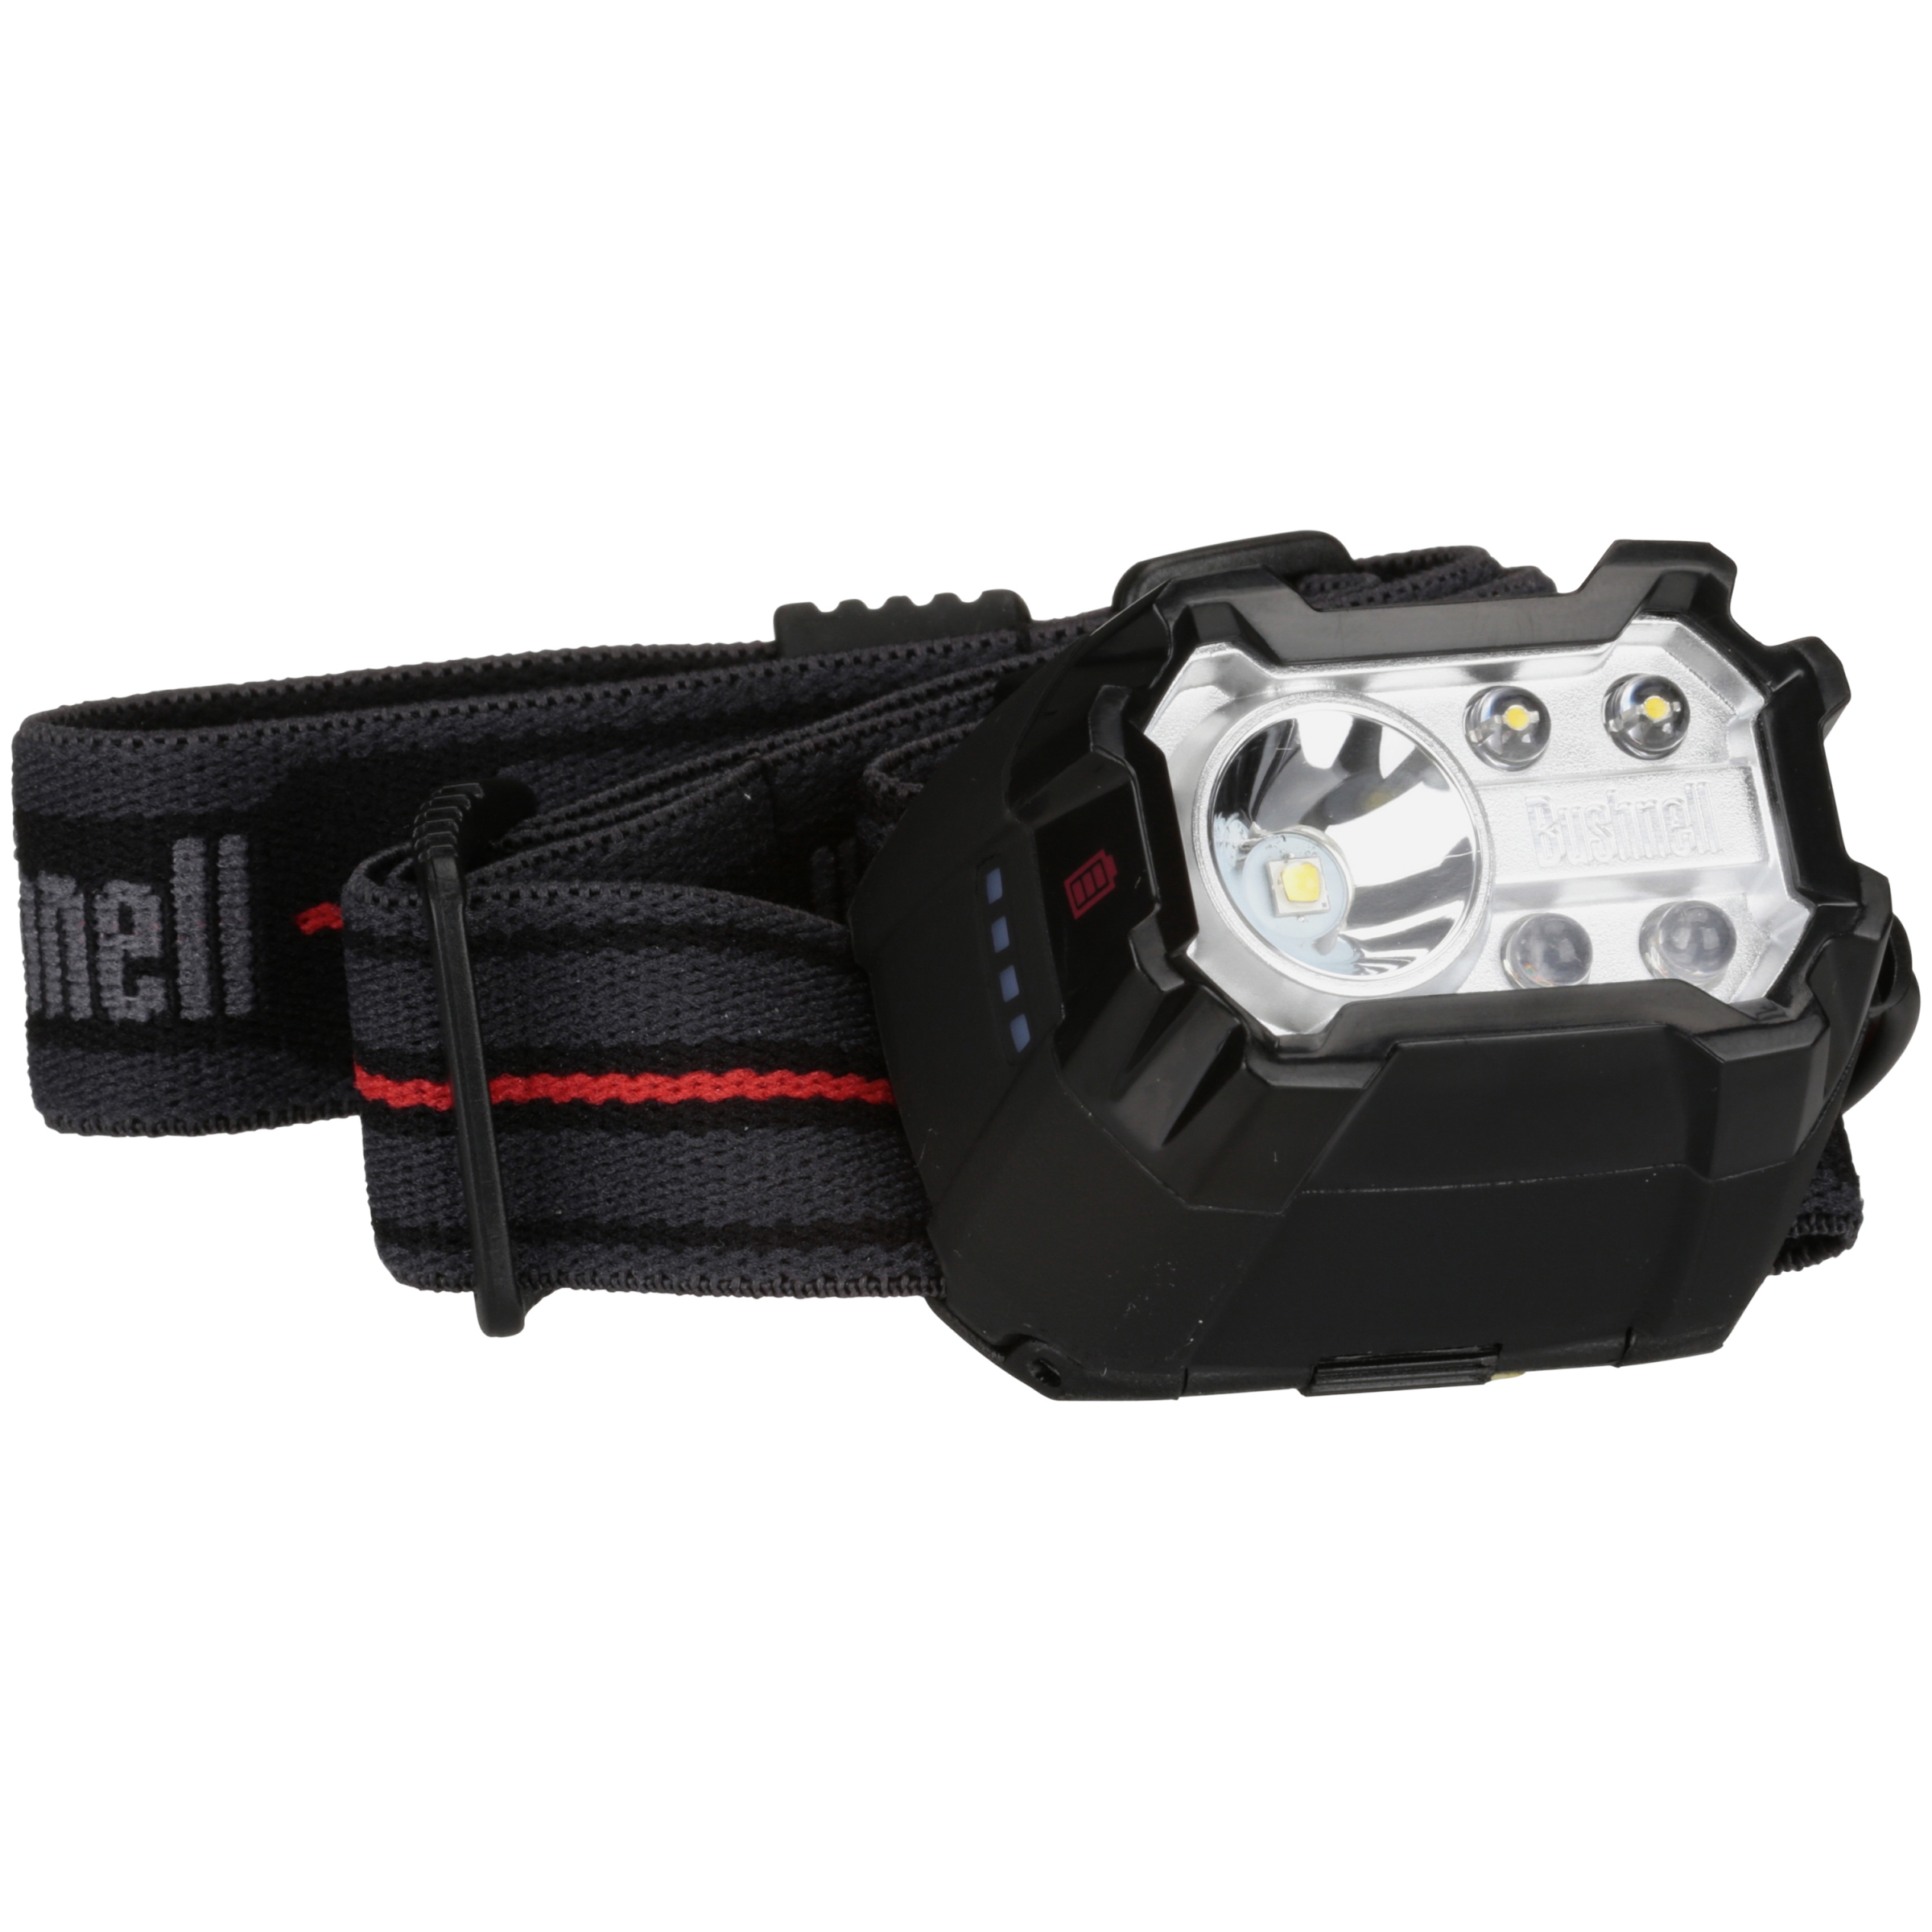 Bushnell Pro Rechargeable 300L Headlamp - image 5 of 6